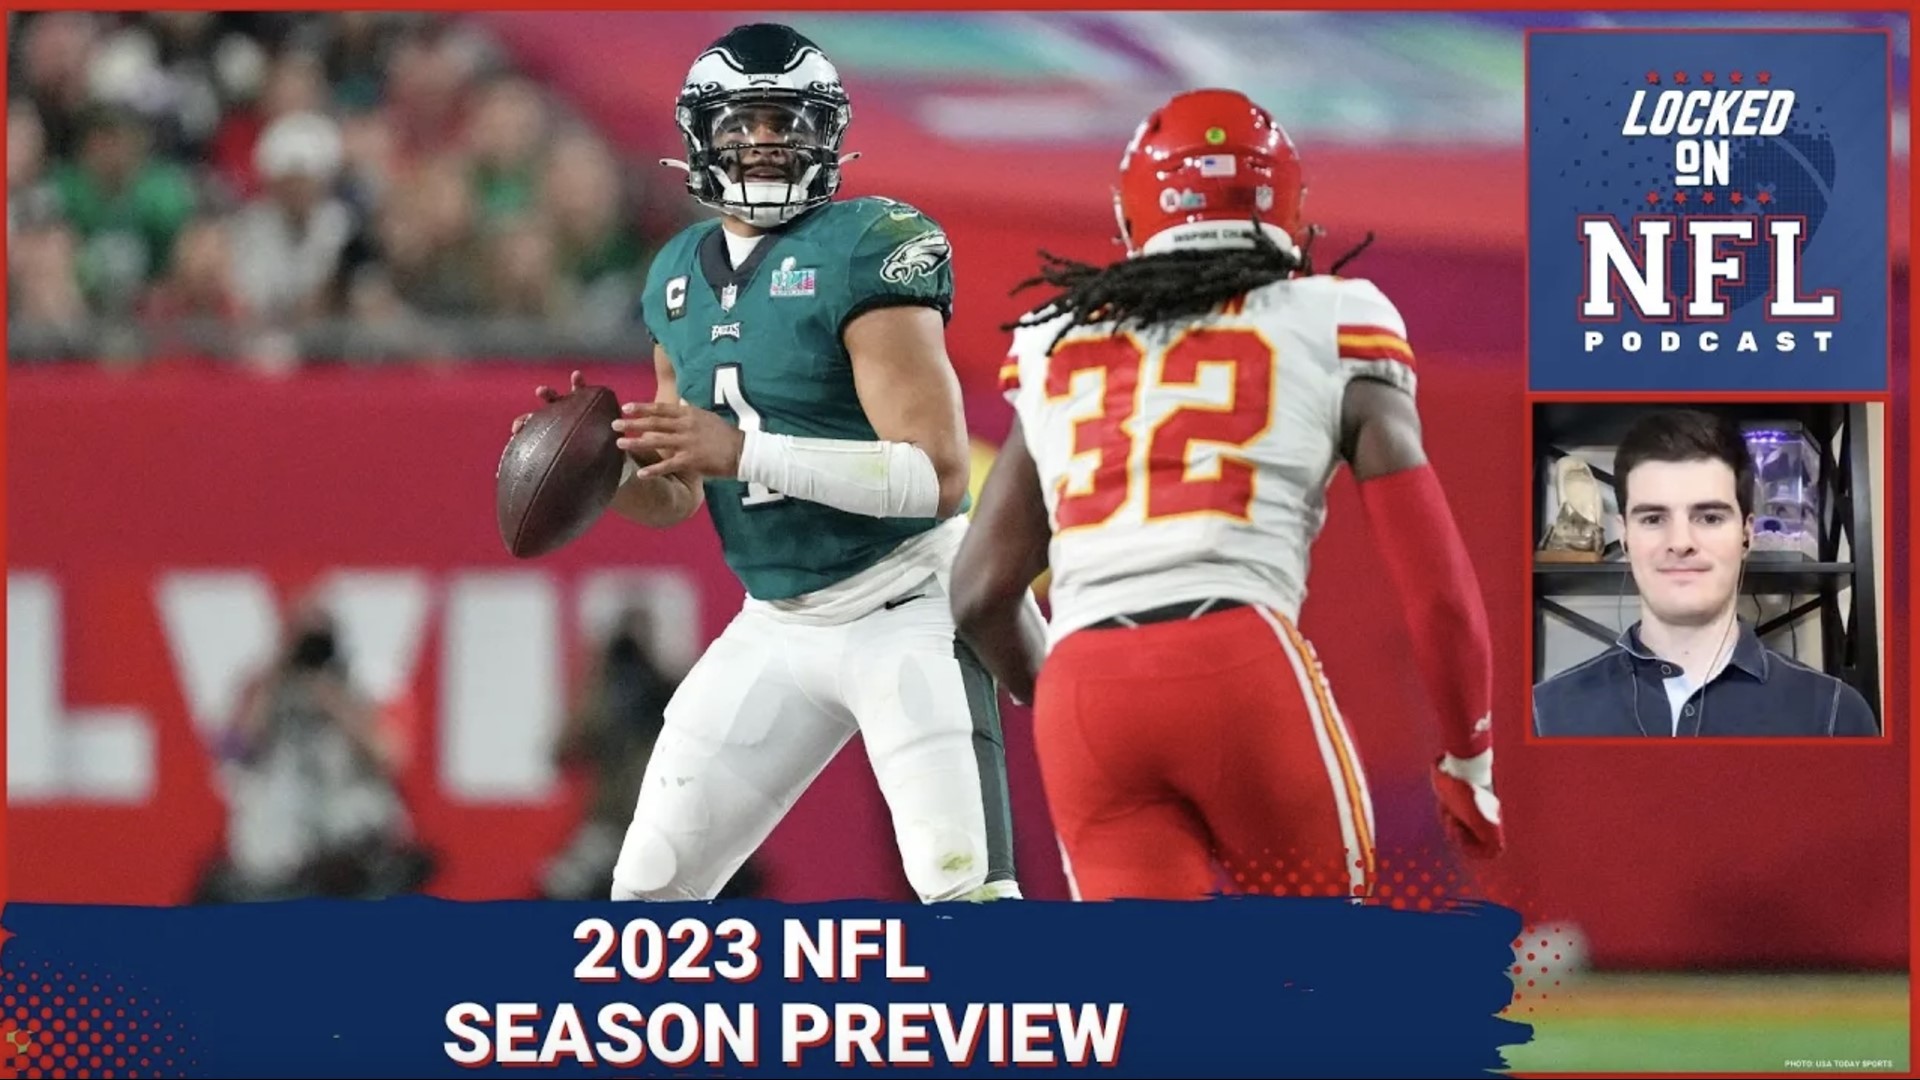 We preview the 2023 NFL season with team, player, division and playoff breakdowns, look at the extension between the Minnesota Vikings and T.J. Hockenson and more!